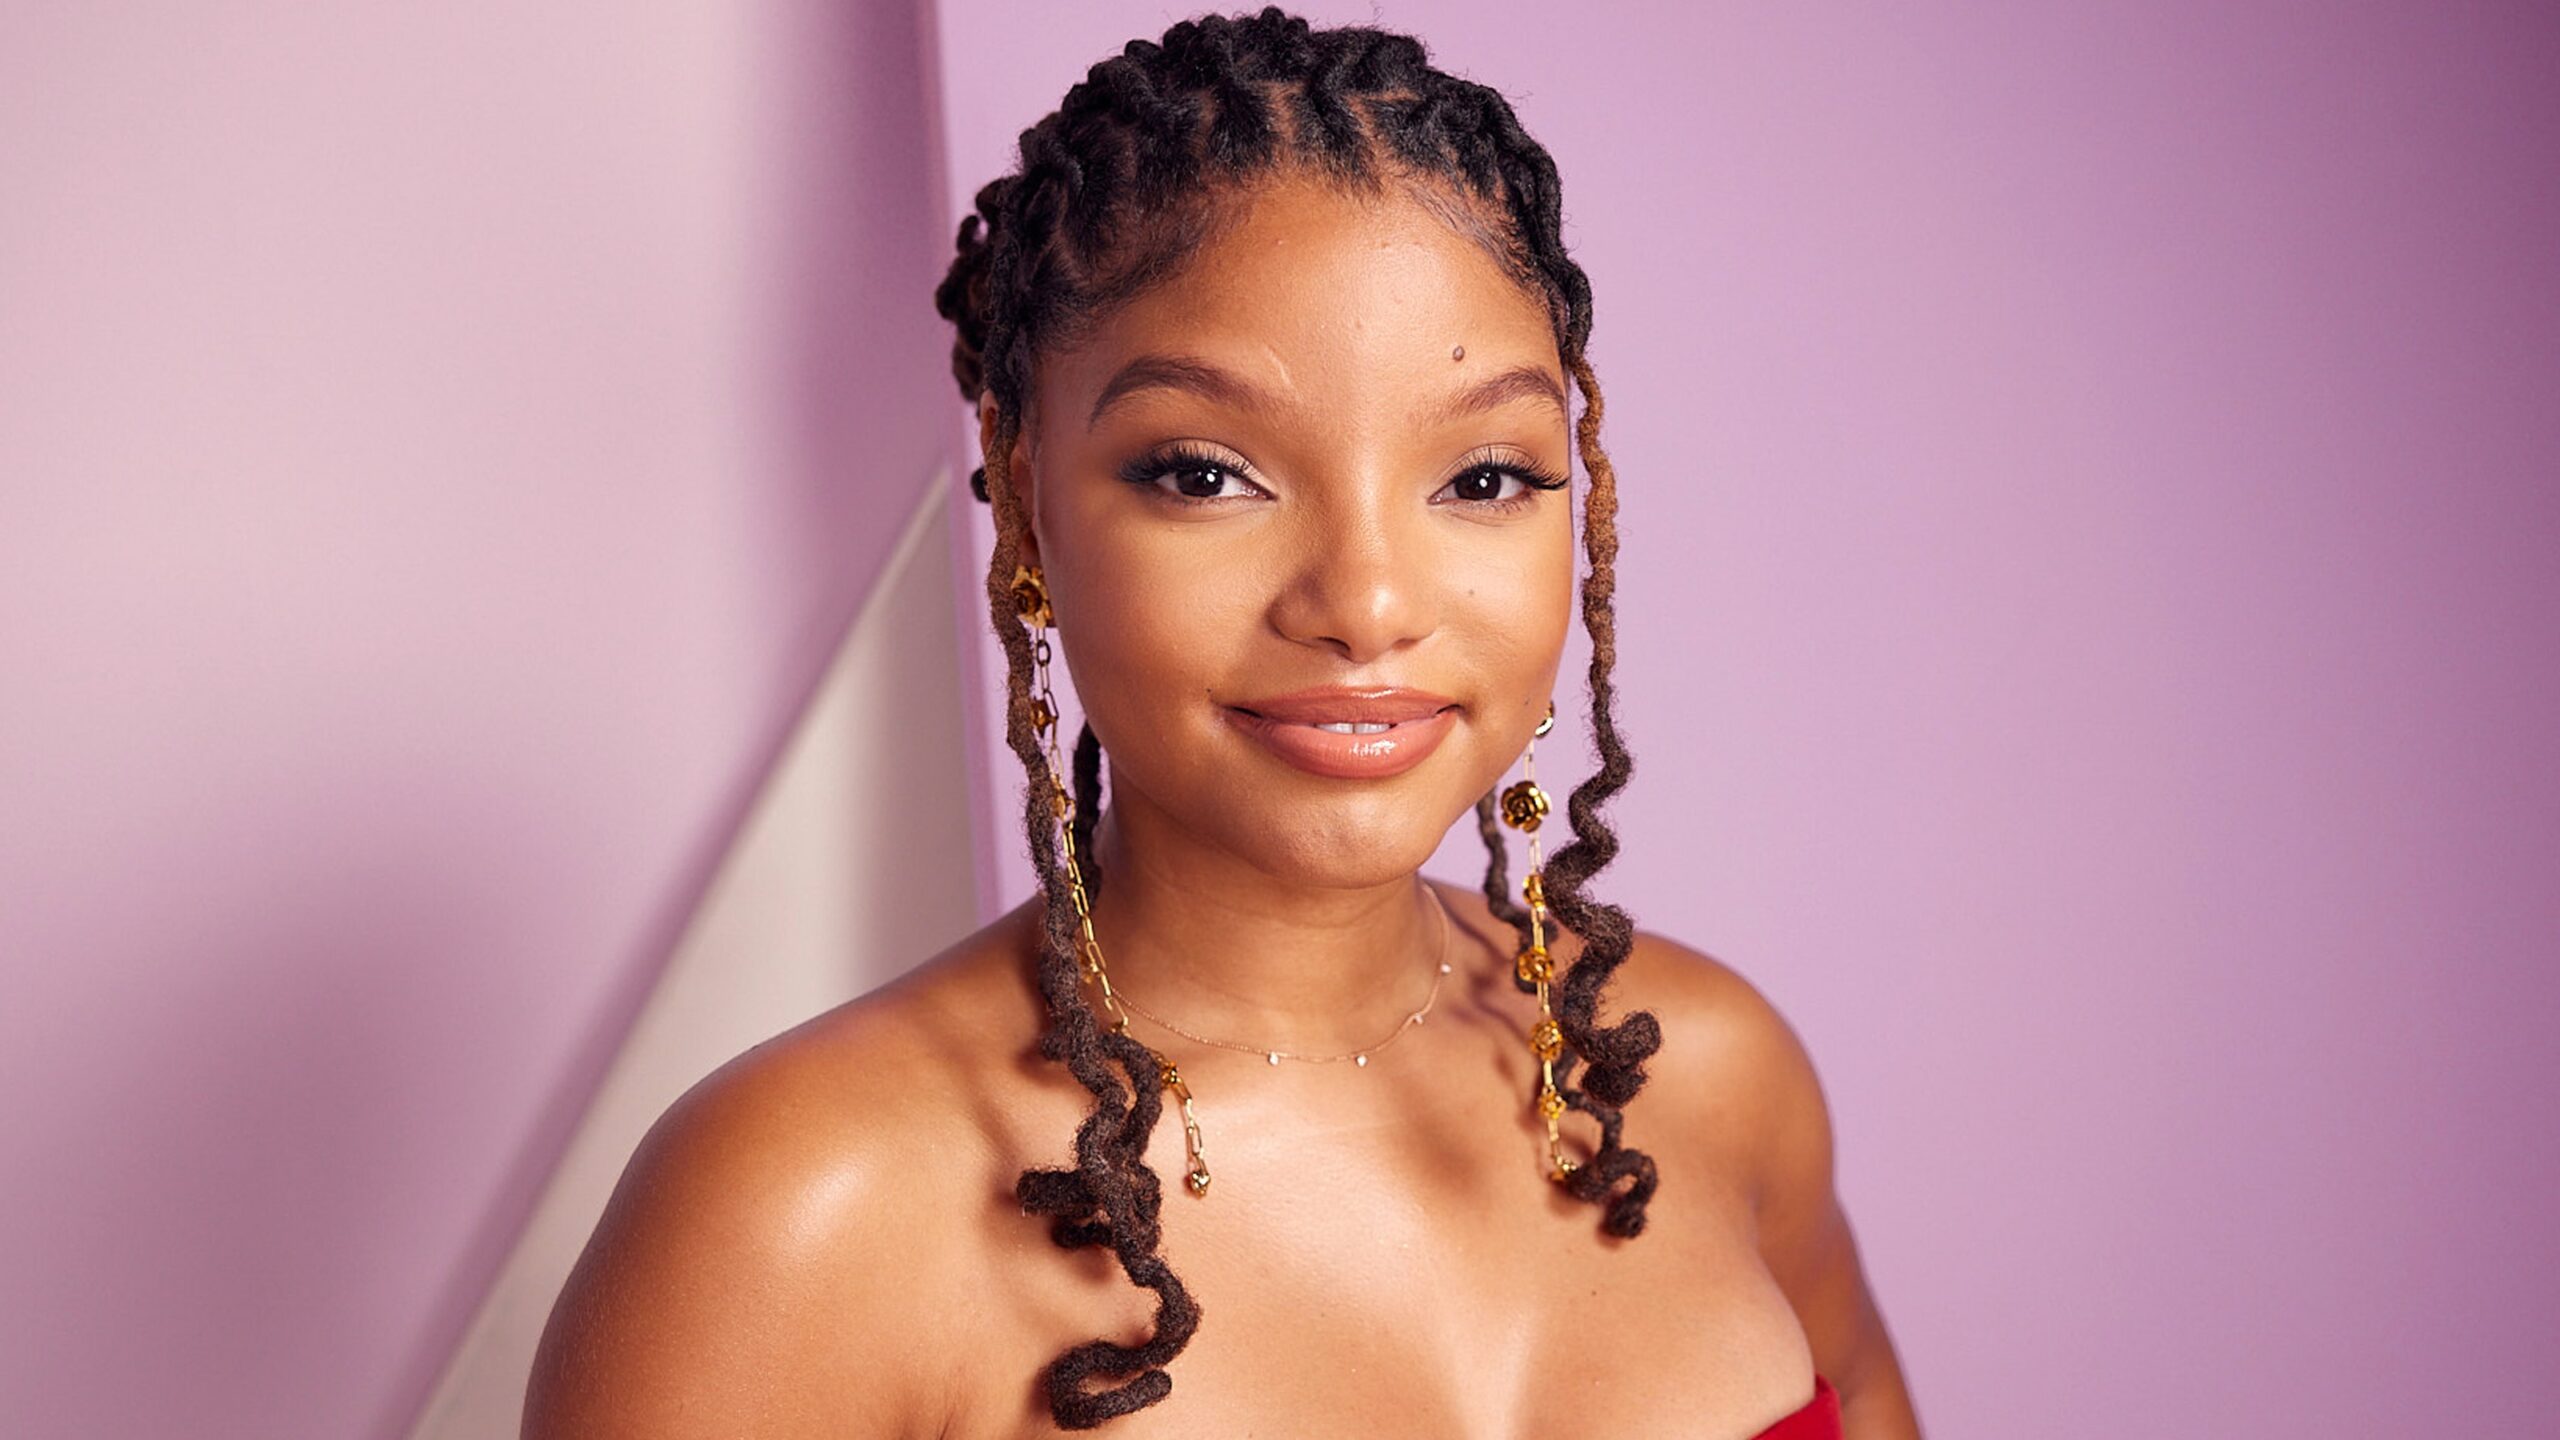 Halle Bailey Broke The Internet With ‘The Little Mermaid’ Trailer Debut